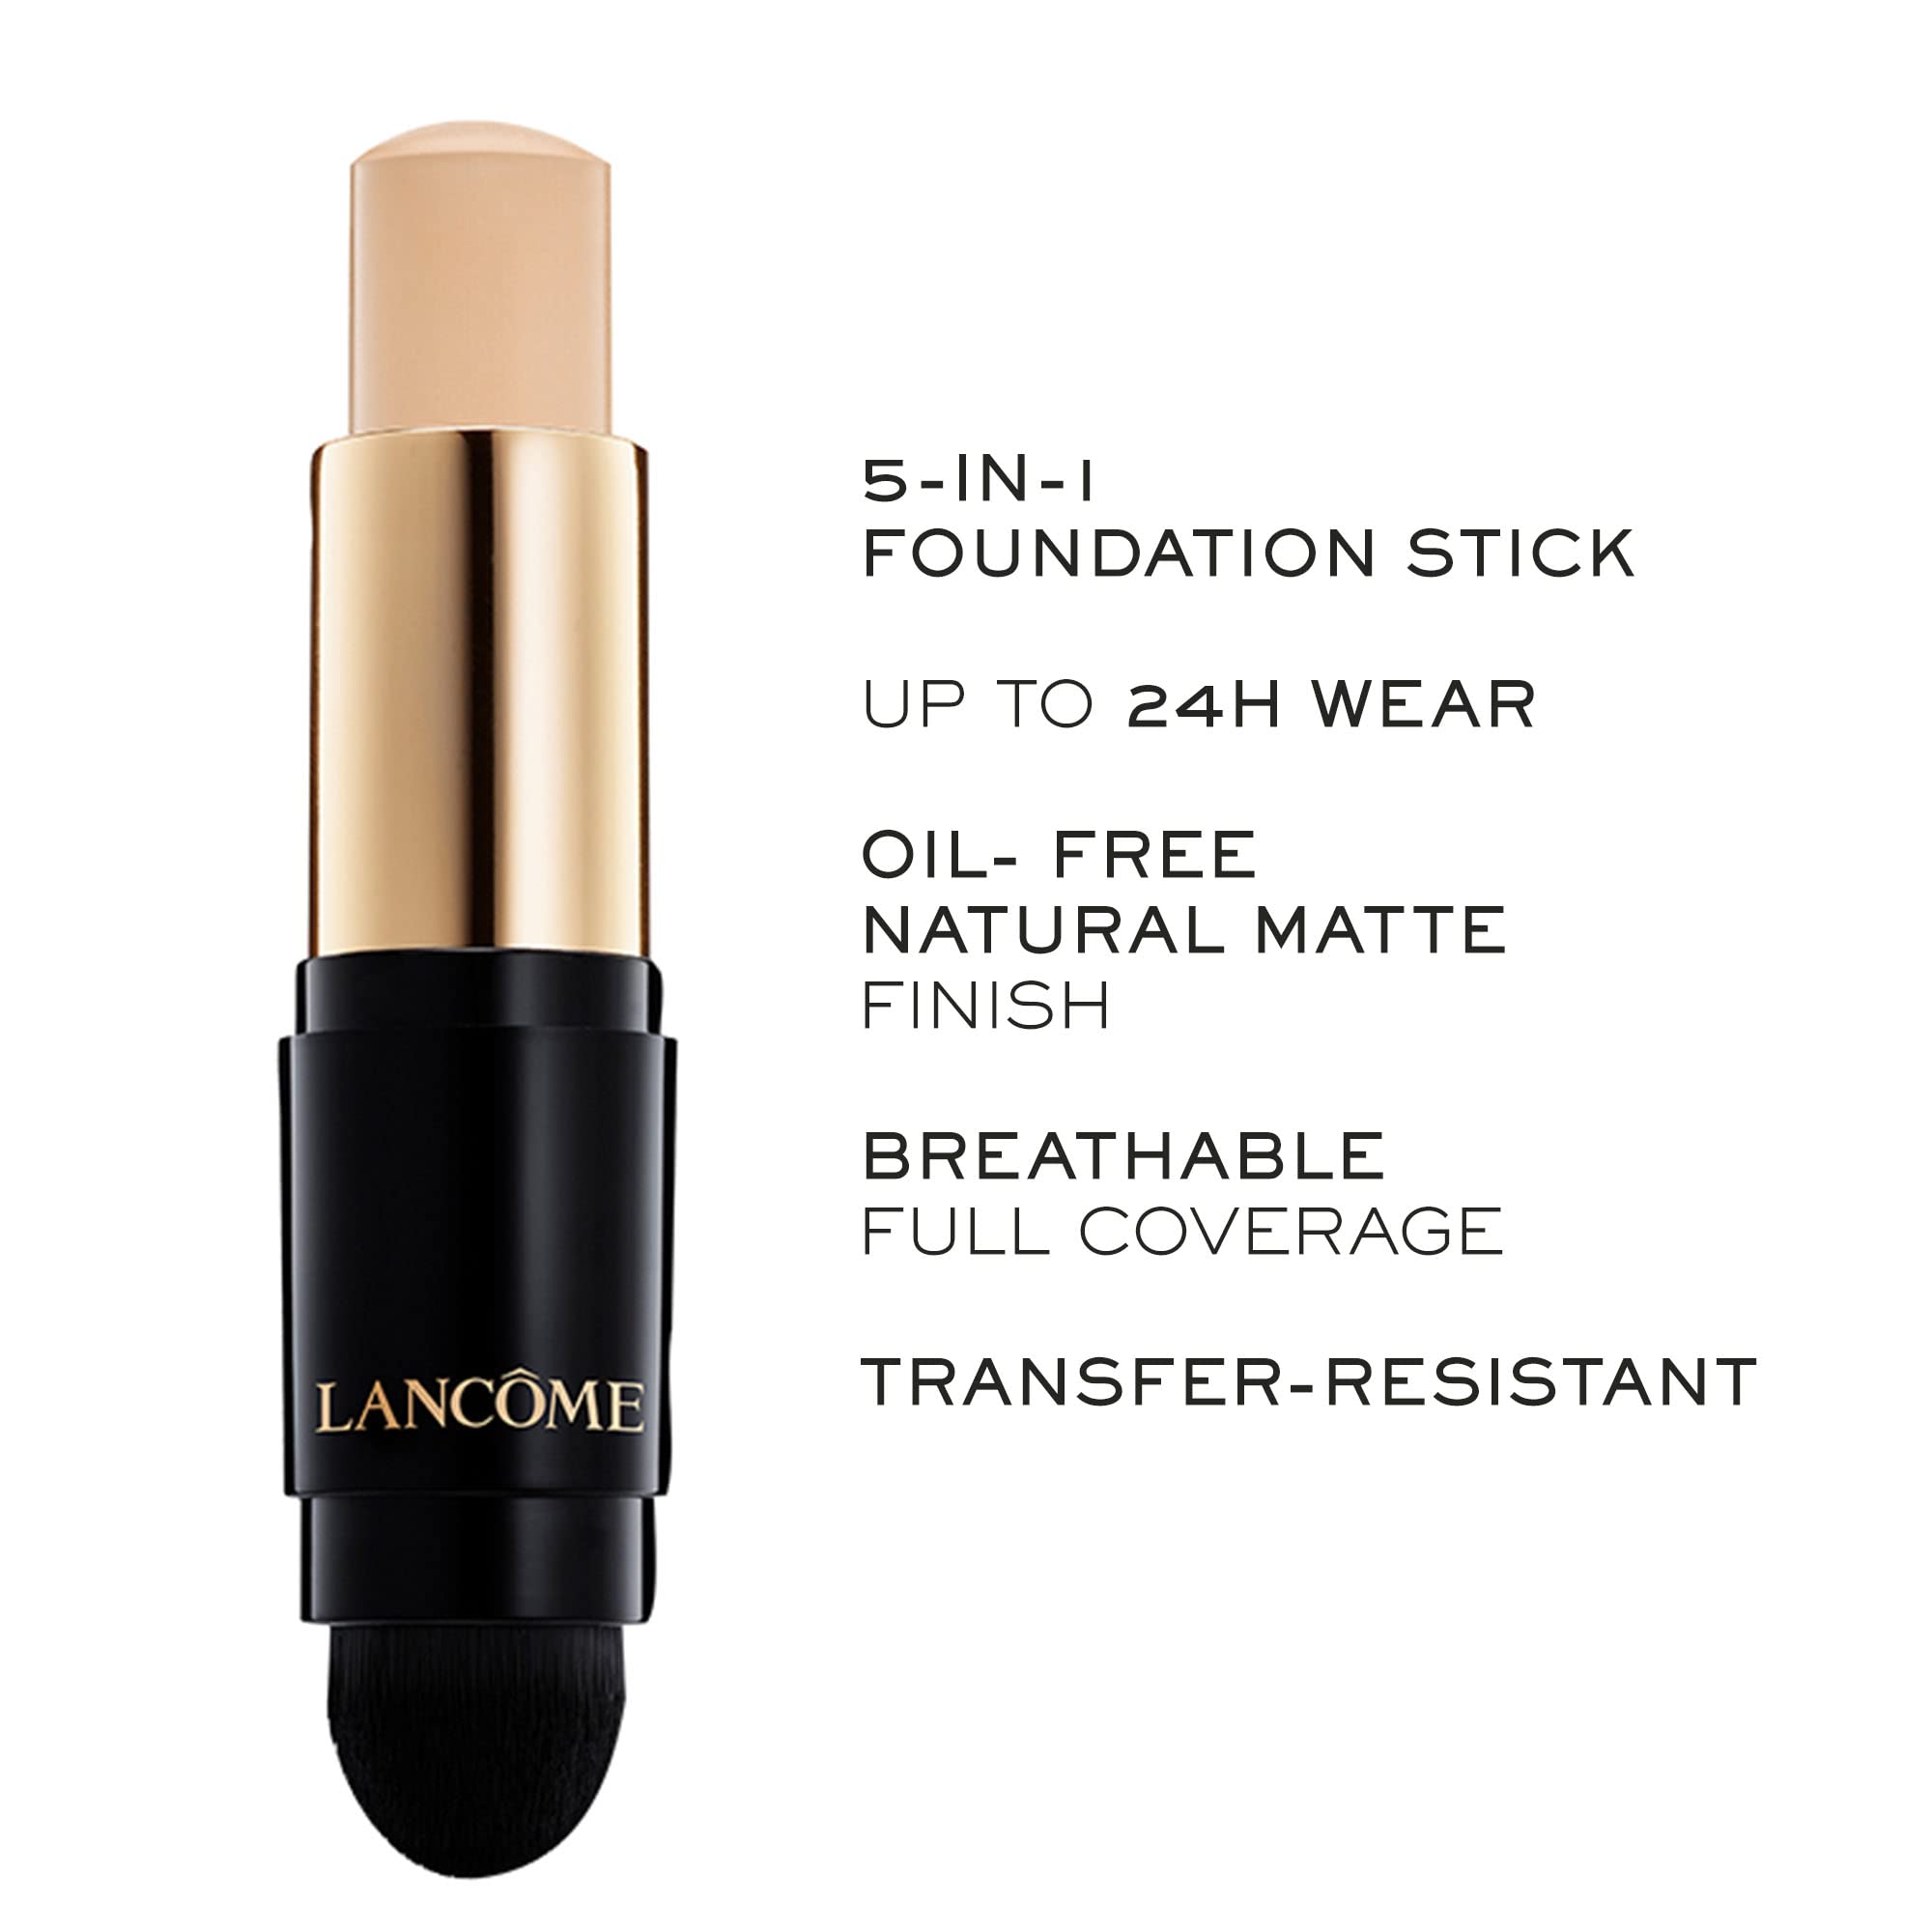 Lancôme Teint Idôle Ultra Wear Foundation Stick for up to 24H Wear - Full Coverage - Oil-Free & Natural Matte Finish